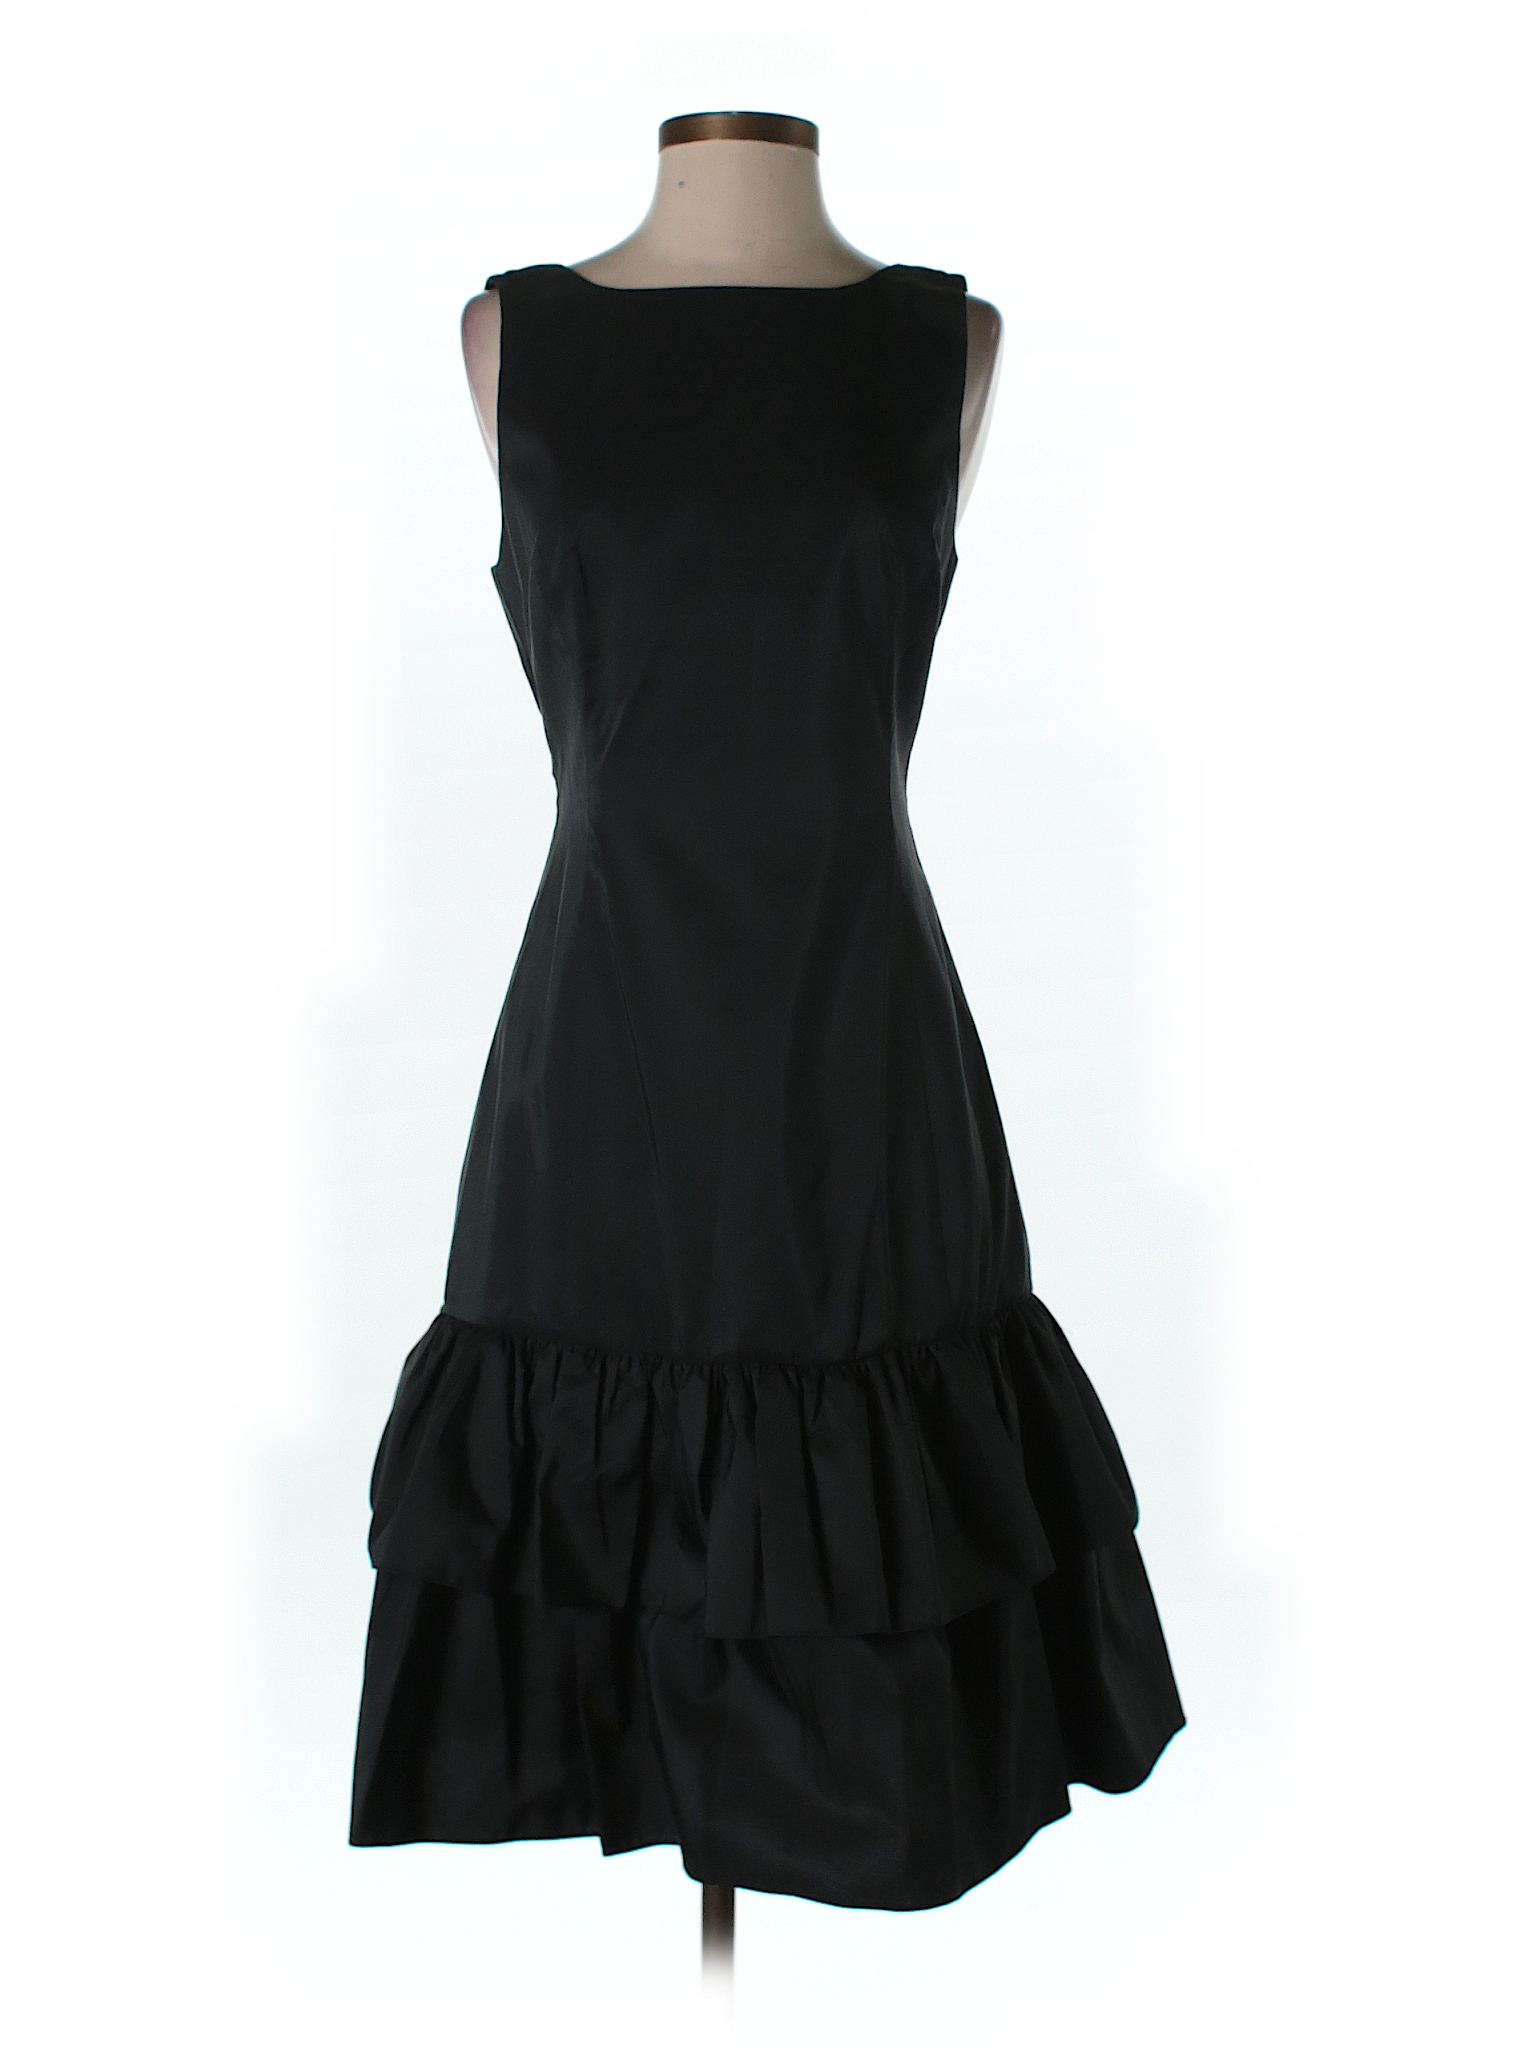 Isaac Mizrahi for Target Solid Black Casual Dress Size 4 - 70% off ...